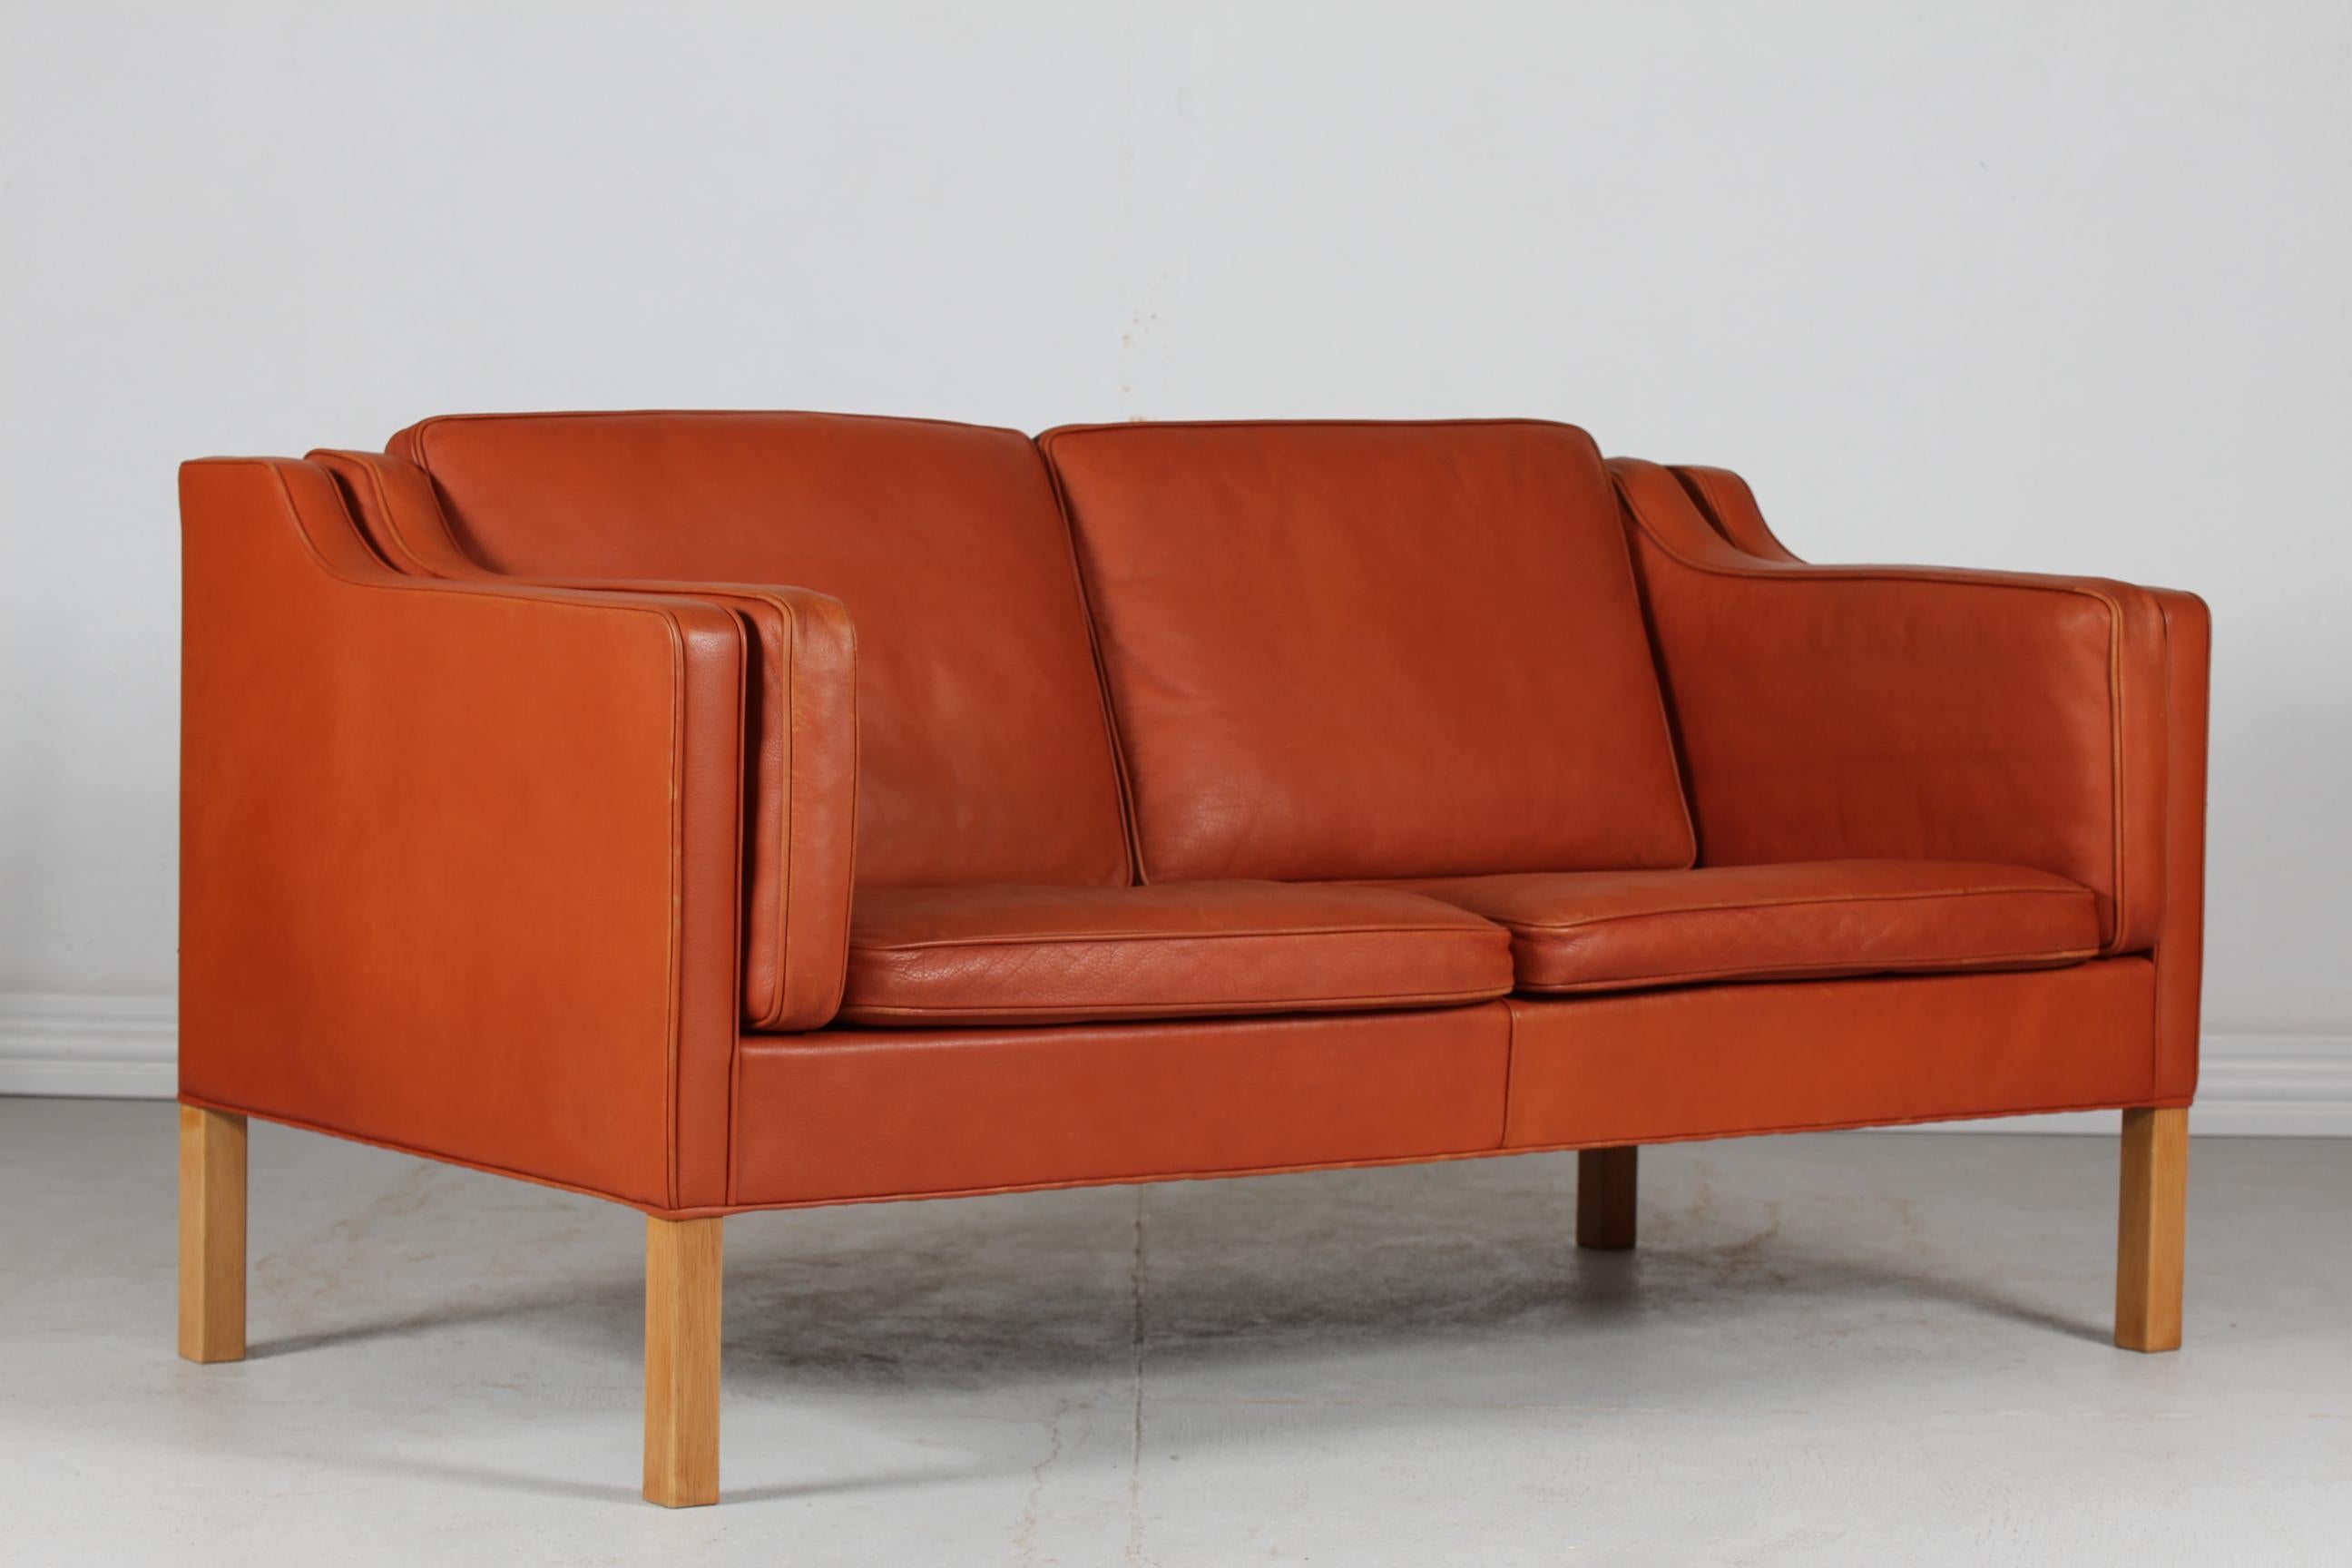 Børge Mogensen danish vintage 2 seater sofa model 2212.
It's upholstered with original cognac colored leather. The legs are made of oak. The cushions are filled inside with granules and natural feathers which give the sofa a very good seating